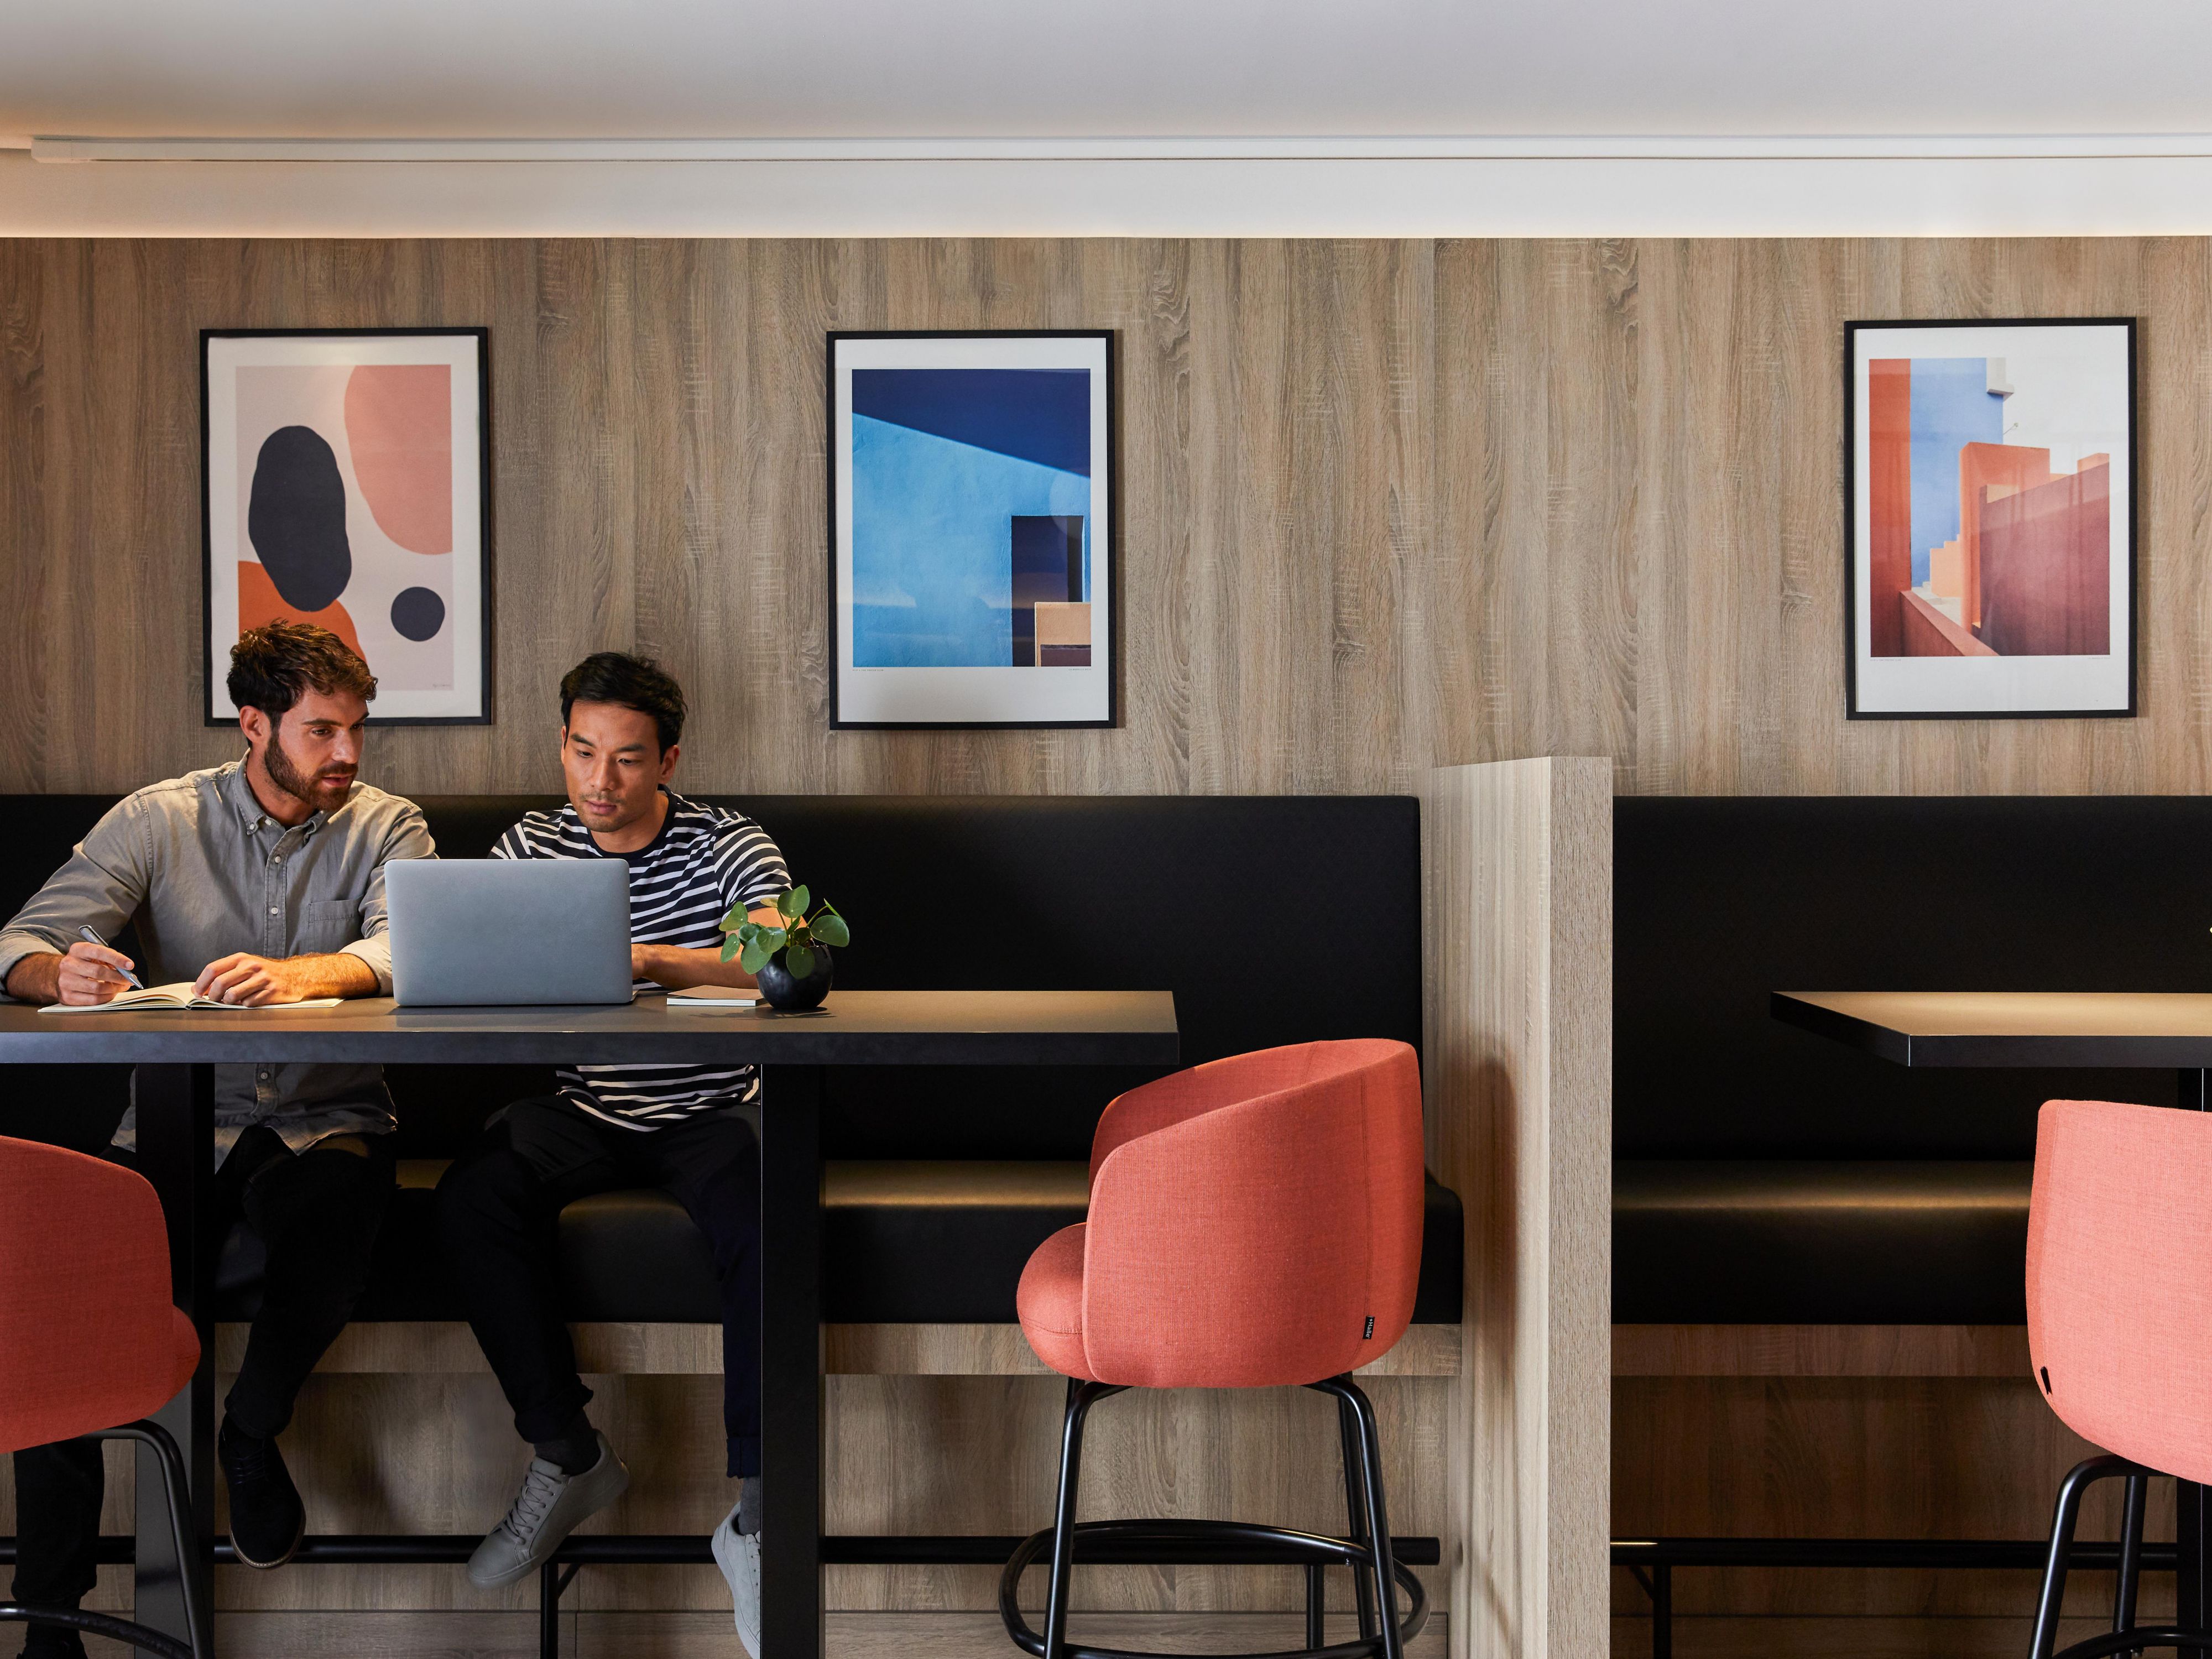 At Crowne Plaza® Hamburg – City Alster, we’ve redesigned our spaces to be more flexible and dynamic so you can easily switch from work time to downtime.